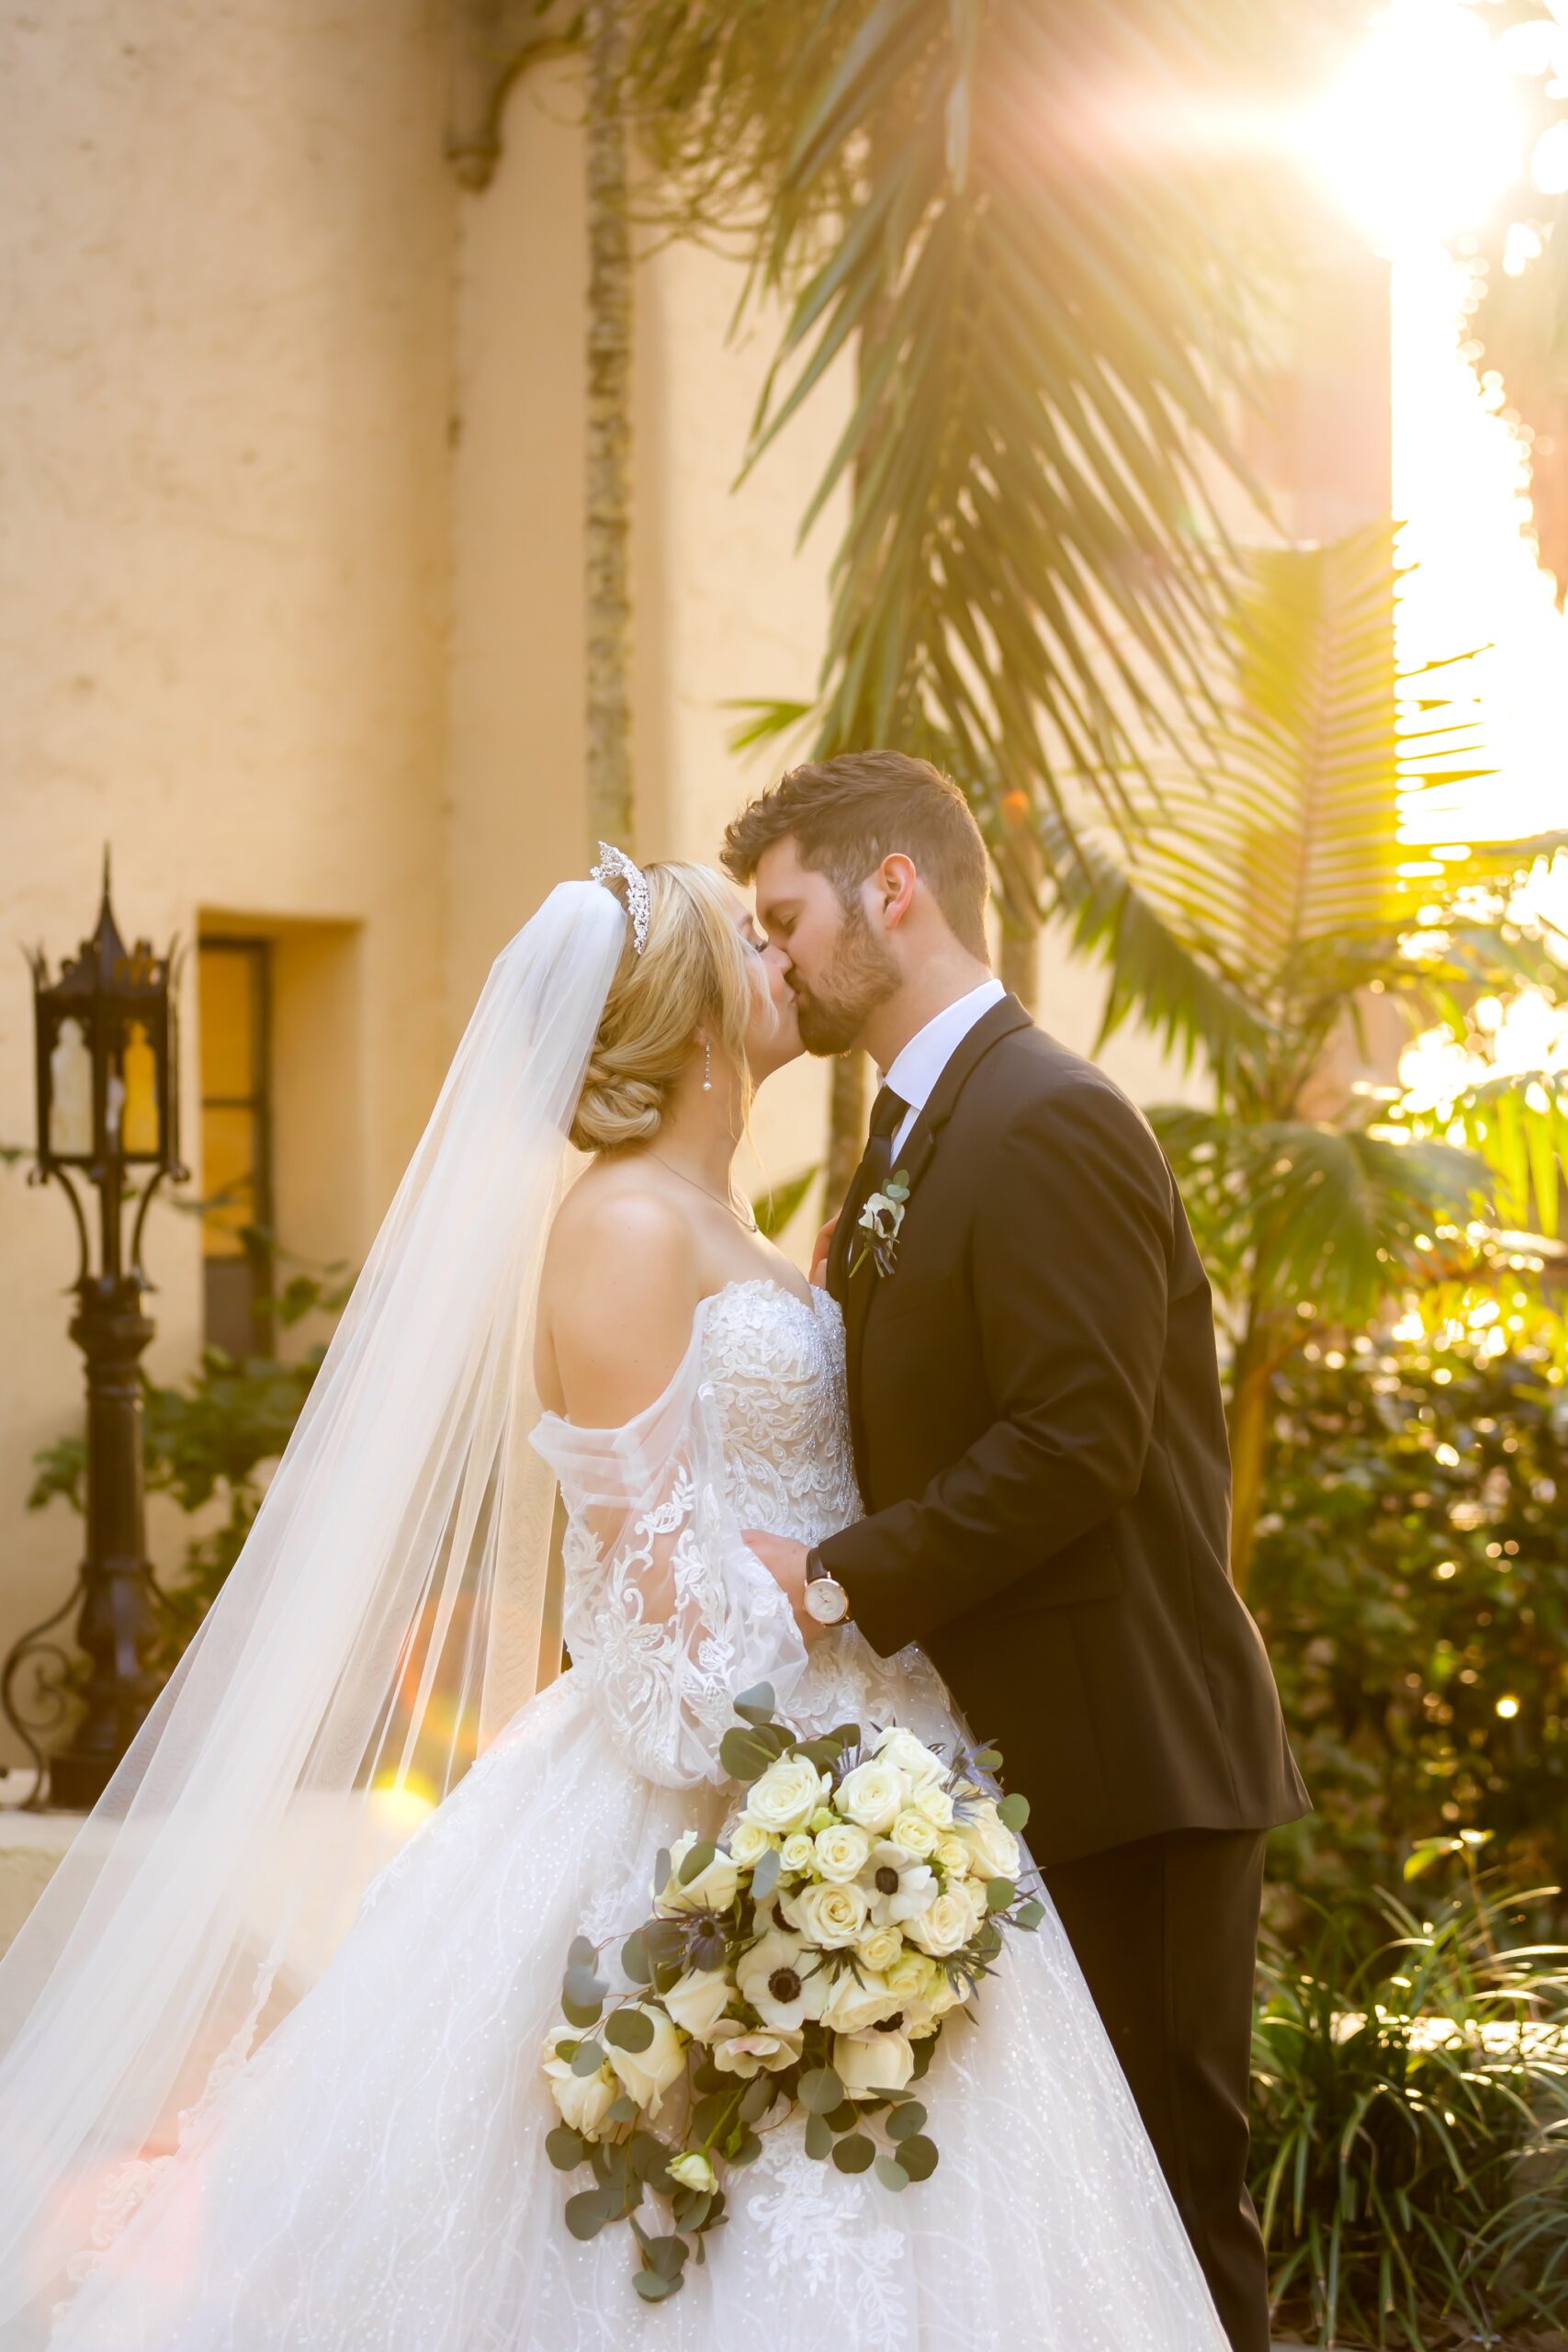 Bride and groom, Morgan and Ethan, kissing during sunset at the Powel Crosley Estate.